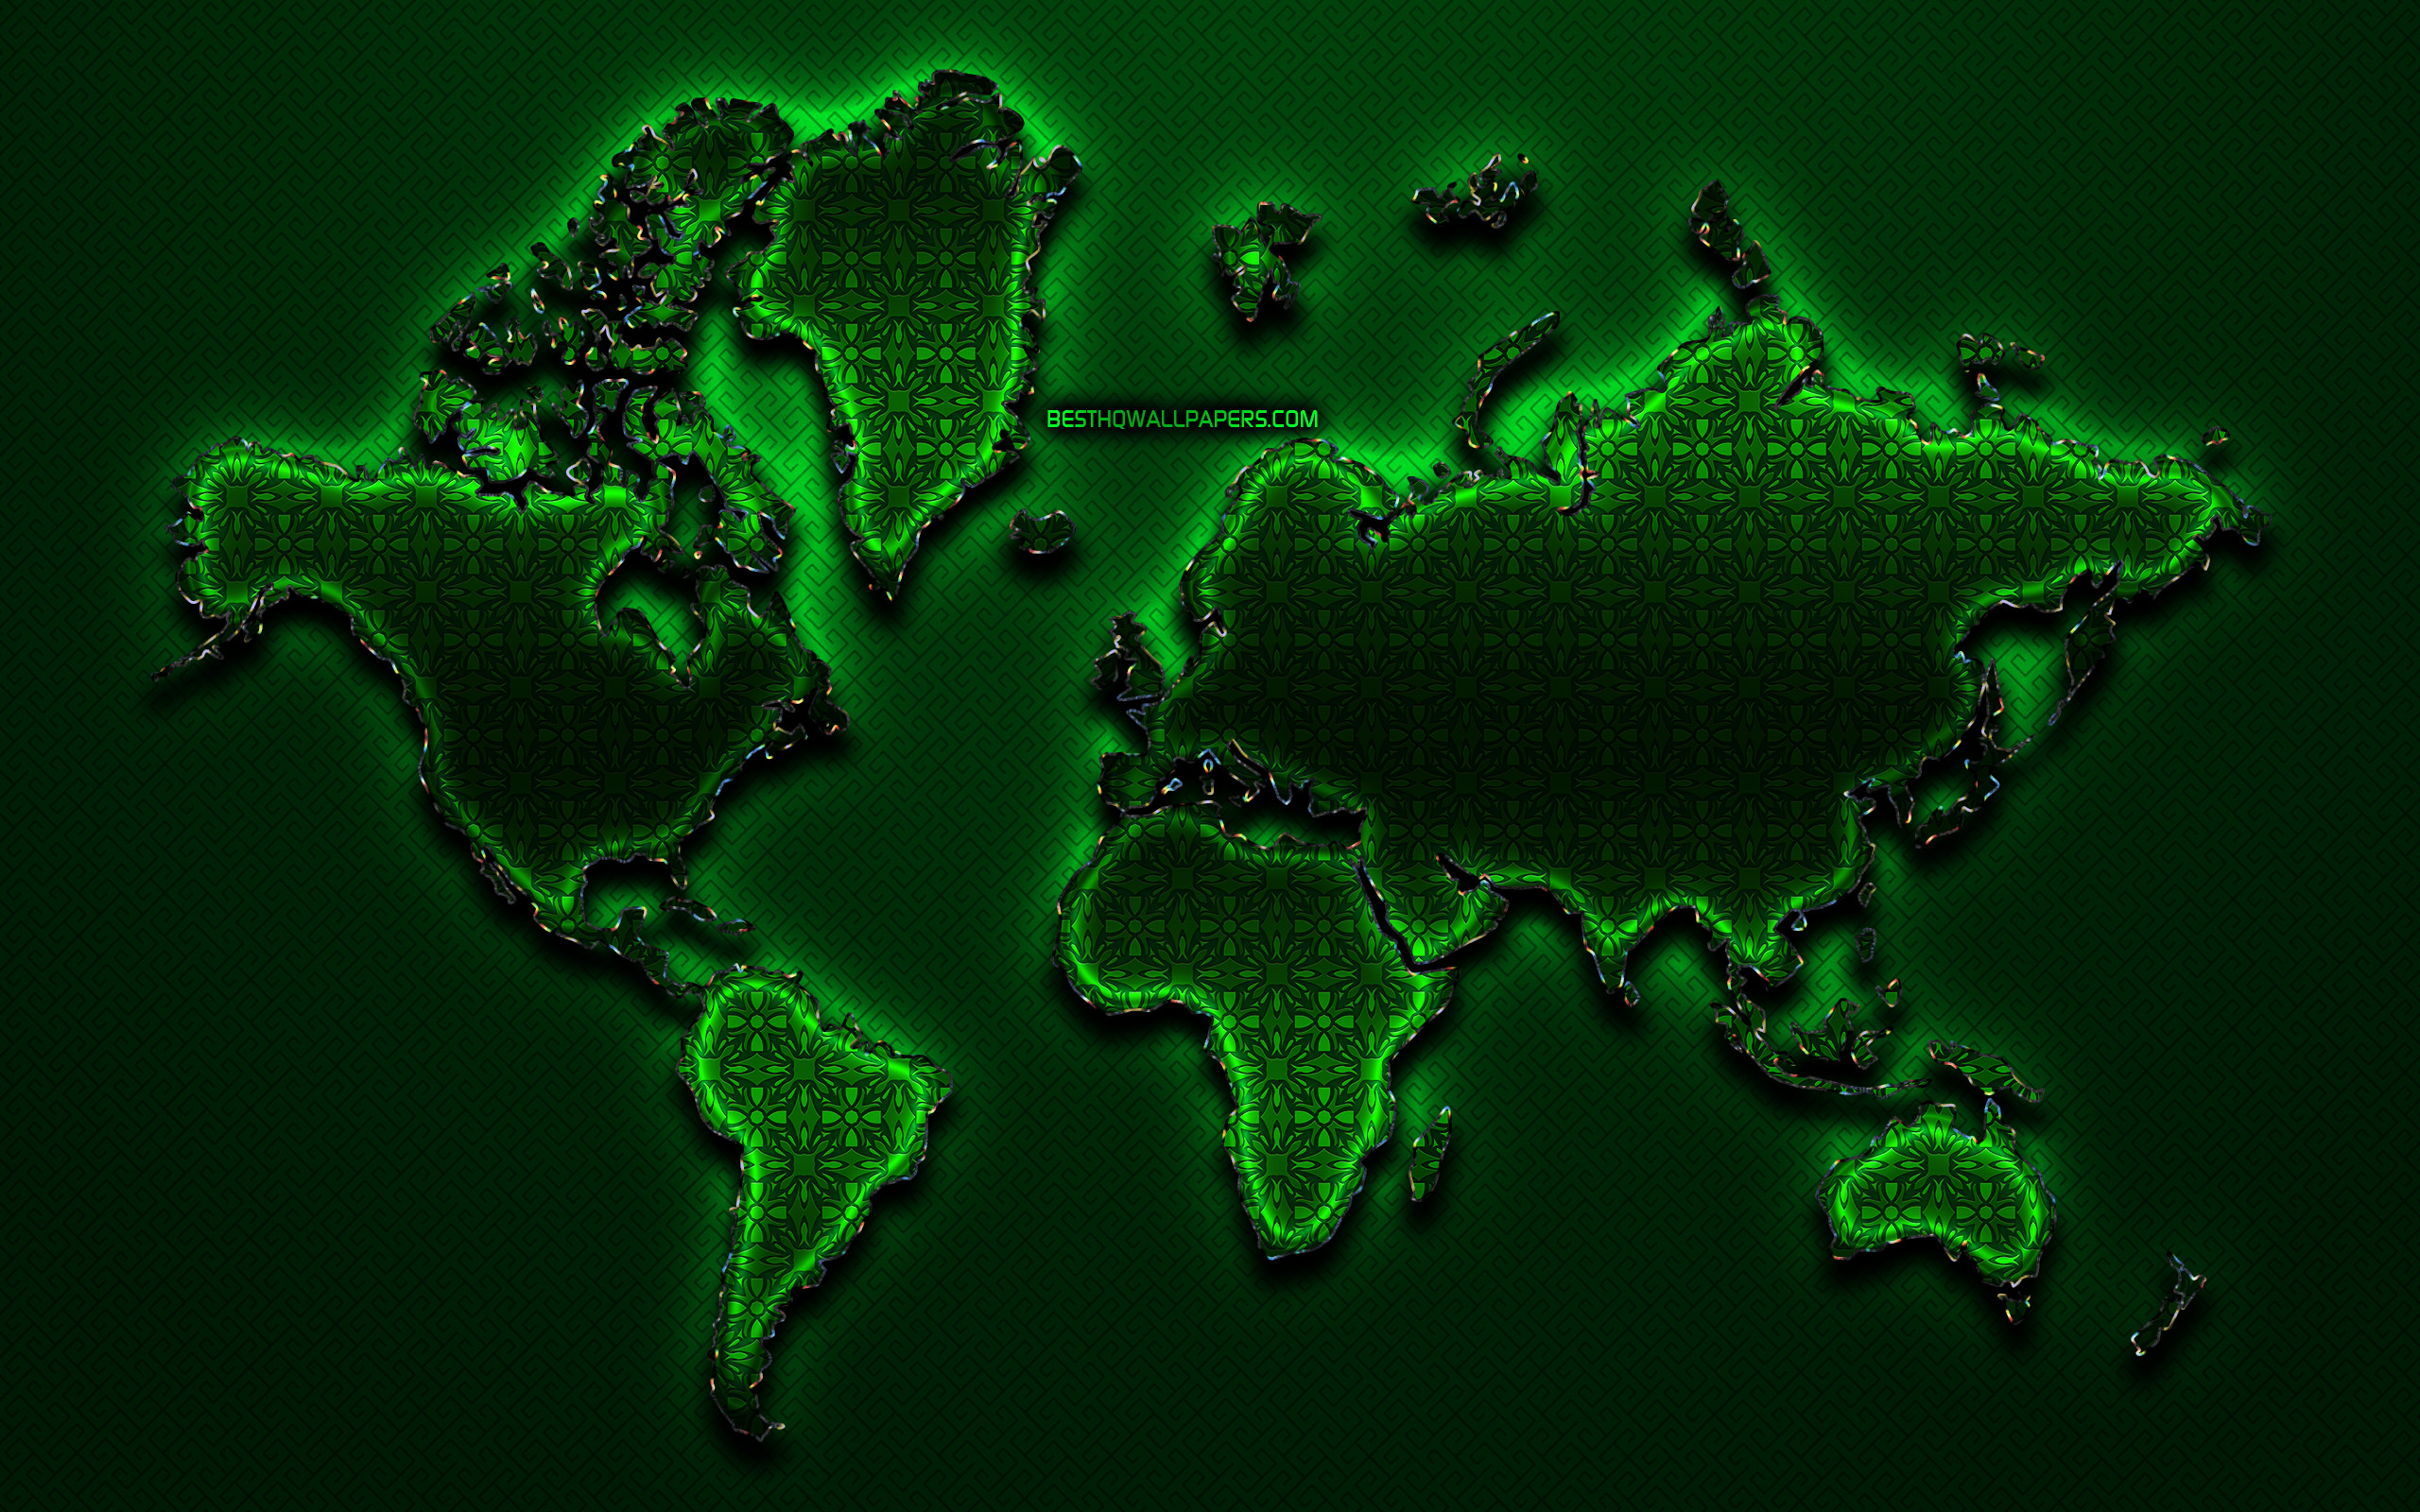 Download wallpaper green world map, world map concept, green vintage background, artwork, creative, green glass world map, 3D art, glass world map, world maps for desktop with resolution 2560x1600. High Quality HD